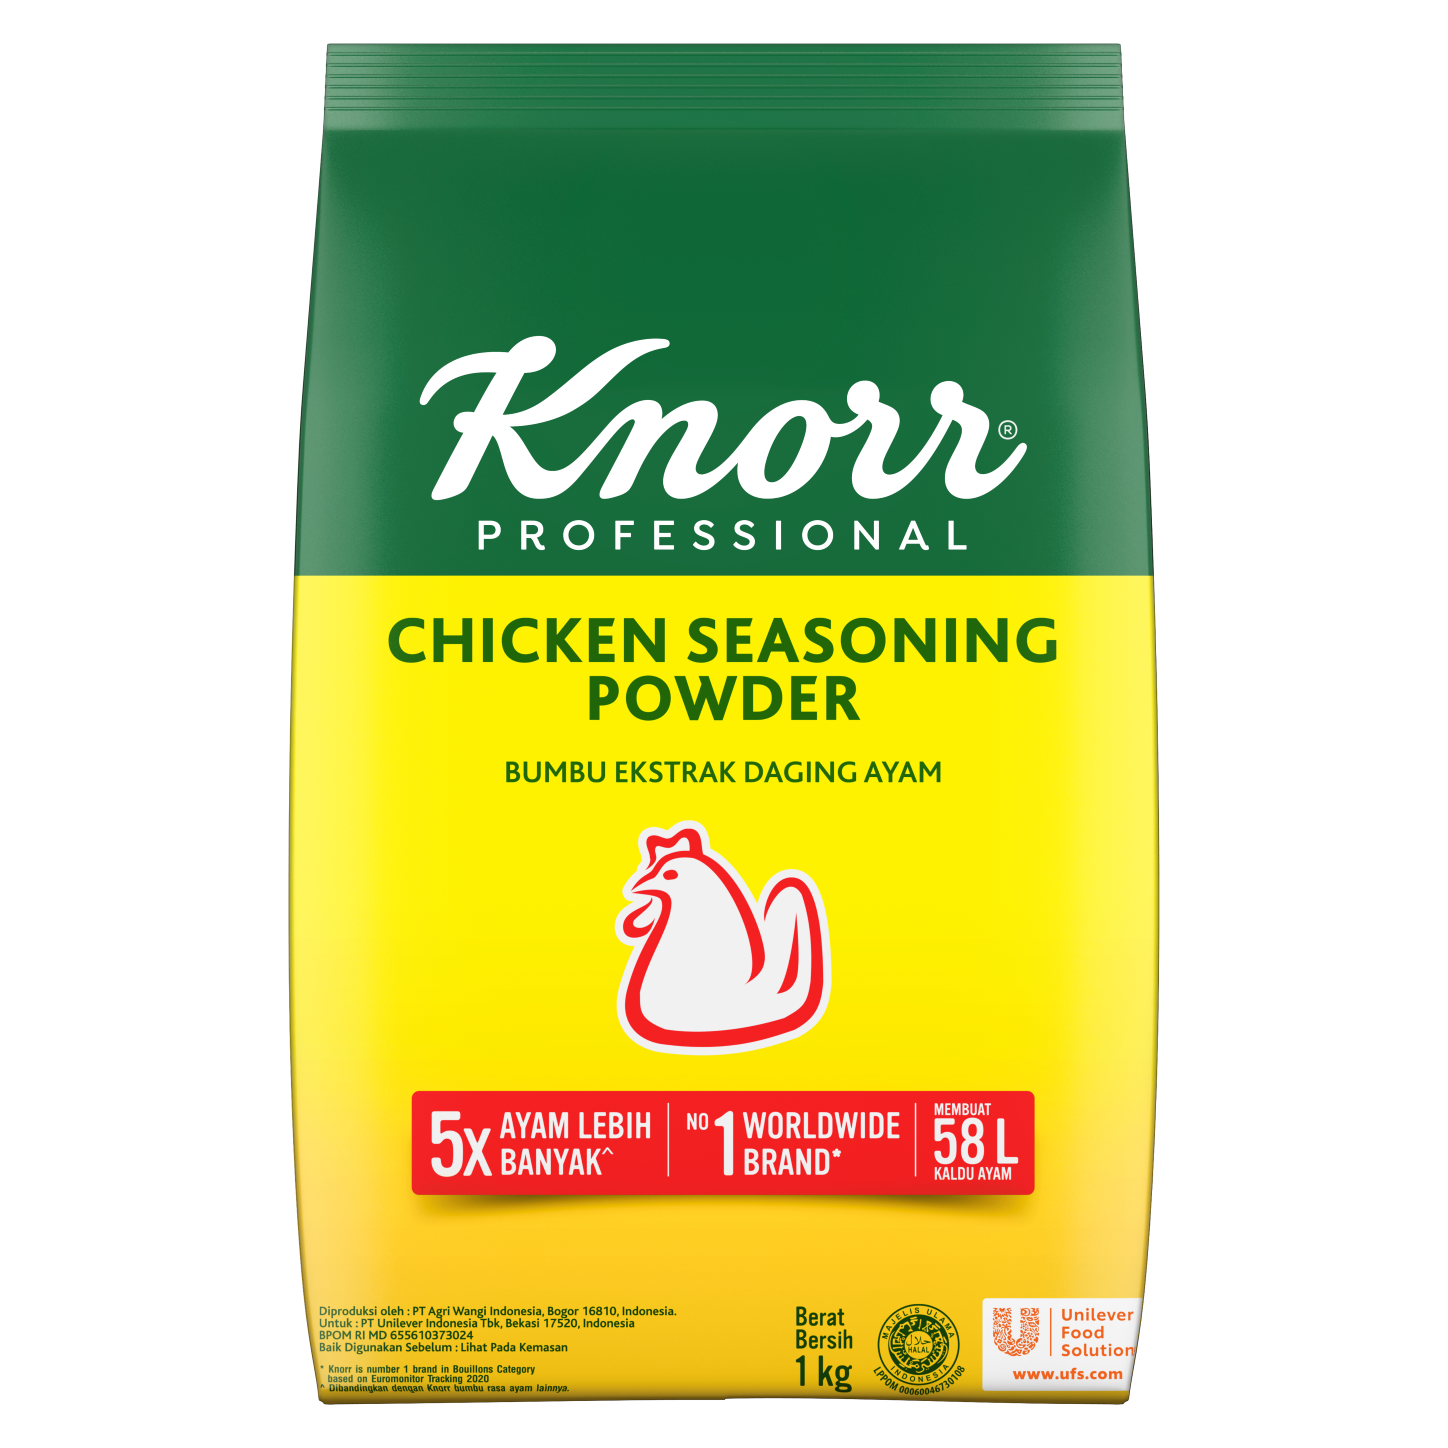 Knorr Chicken Powder 1kg - Knorr Chicken Powder, the #1 premium seasoning that delivers the best dishes*.